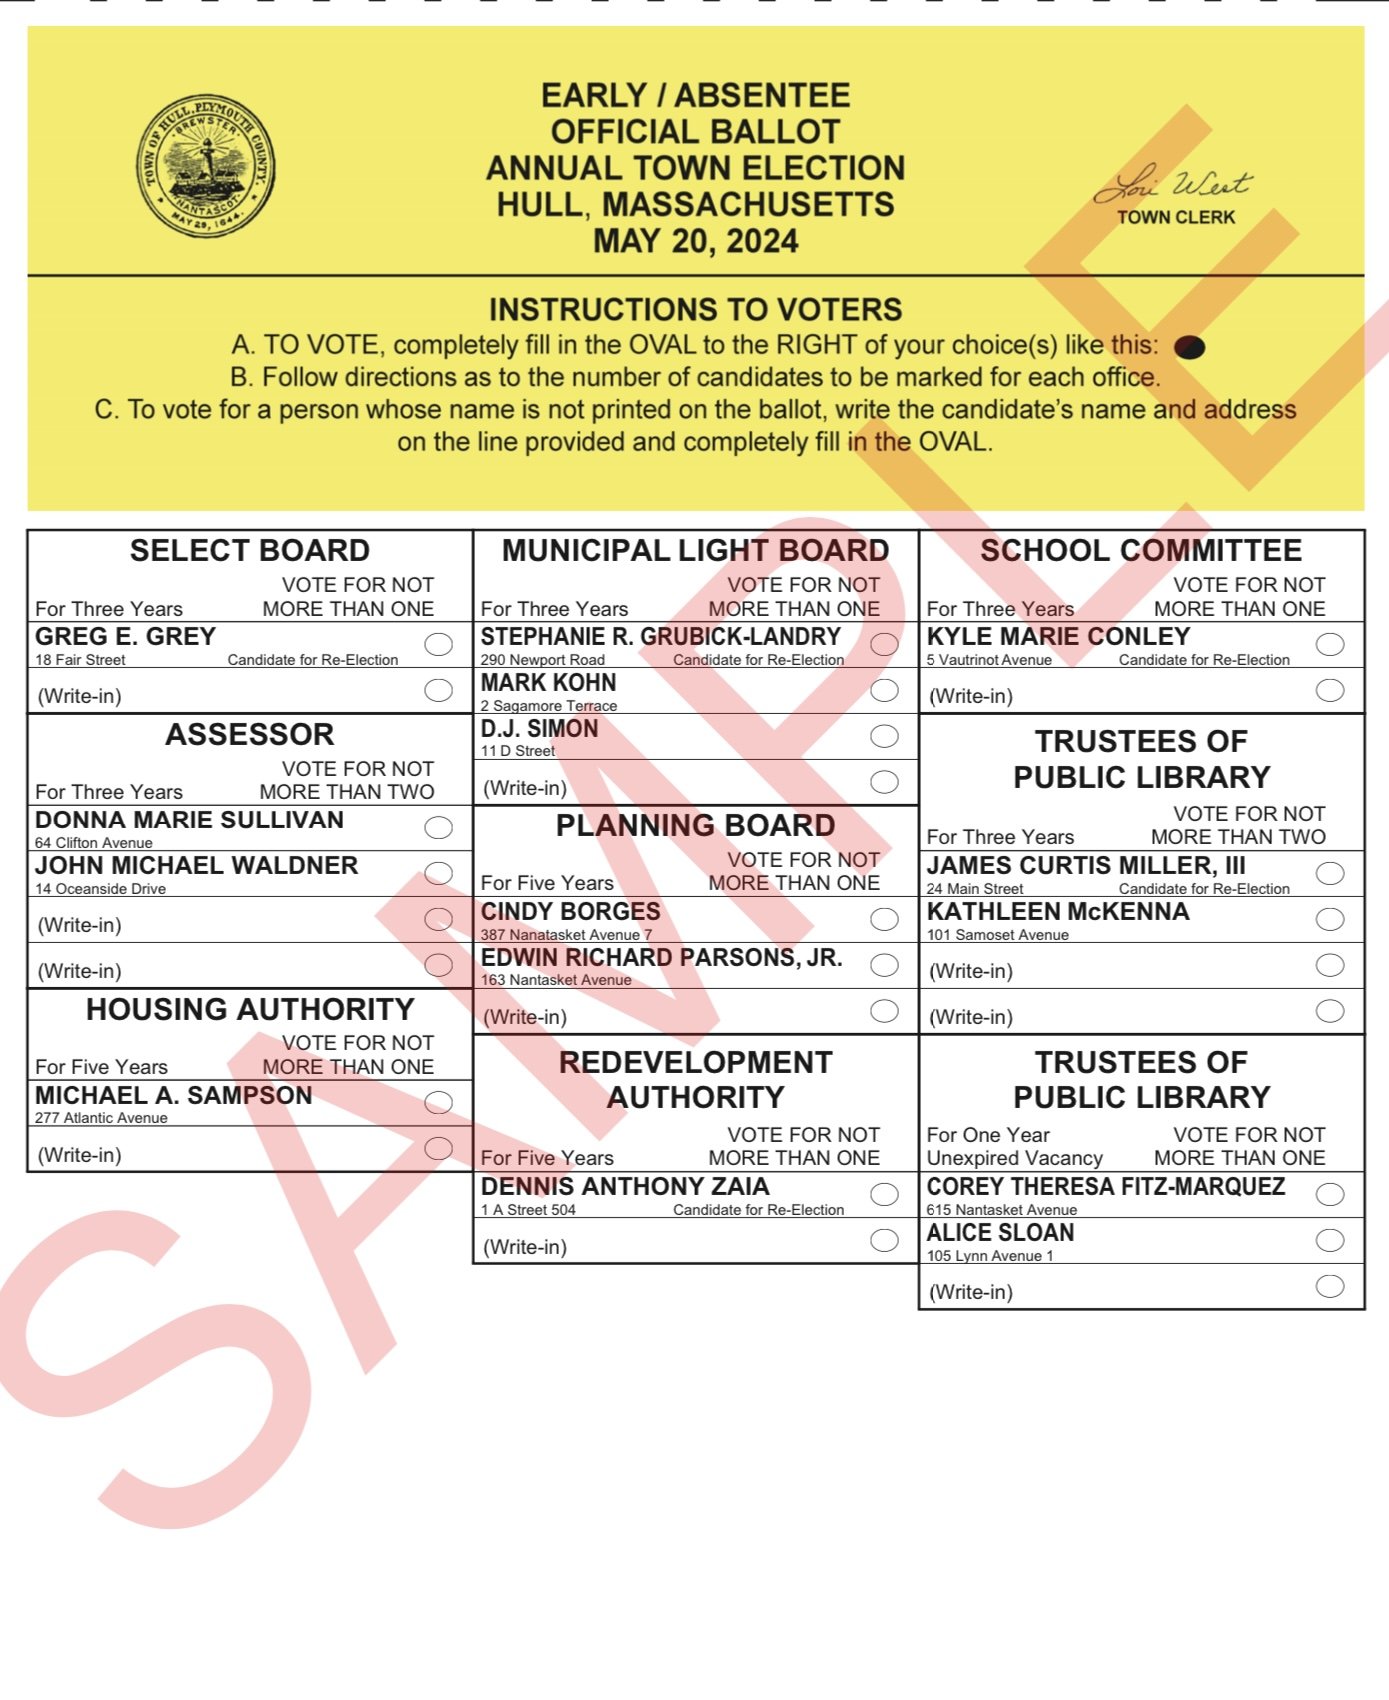 Hull&rsquo;s Annual Town Election will be held on Monday, May 20. Polls will be open at the high school from 7 a.m. to 8 p.m. This is a sample of the ballot that will be presented to voters. #hullmanews #hullma #nantasket #MALocalNews #hulltimes #sou